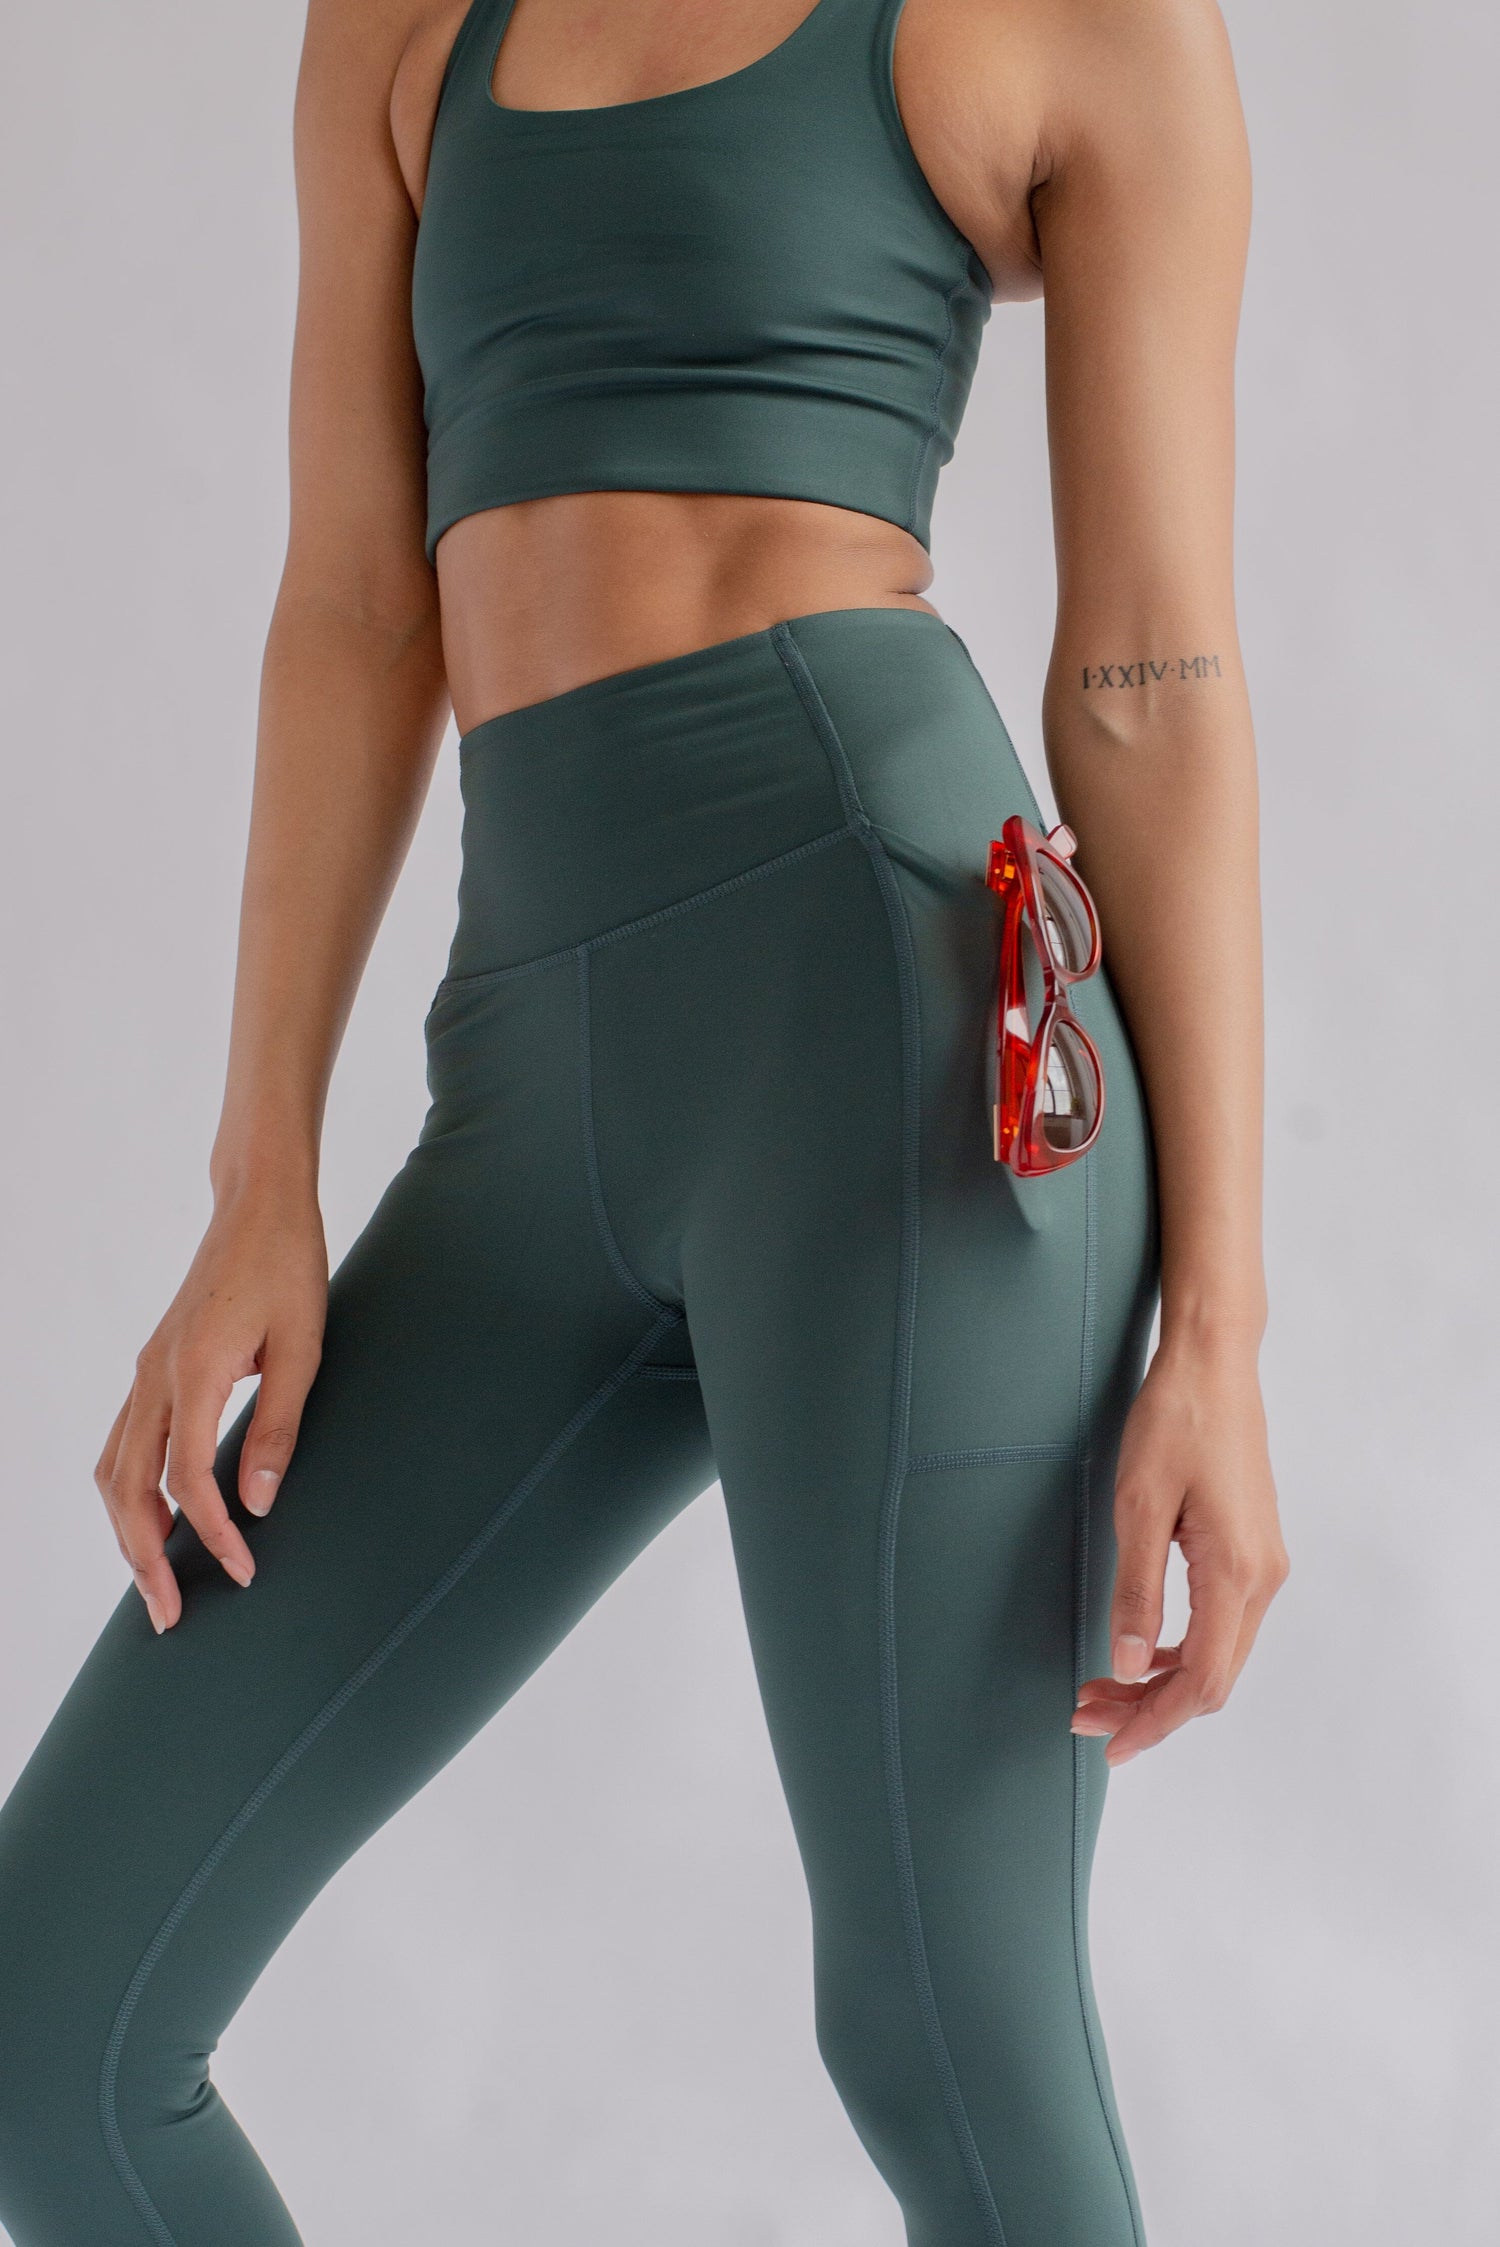 Girlfriend Collective W's High-Rise Pocket Legging - Made From Recycled Water Bottles Pants